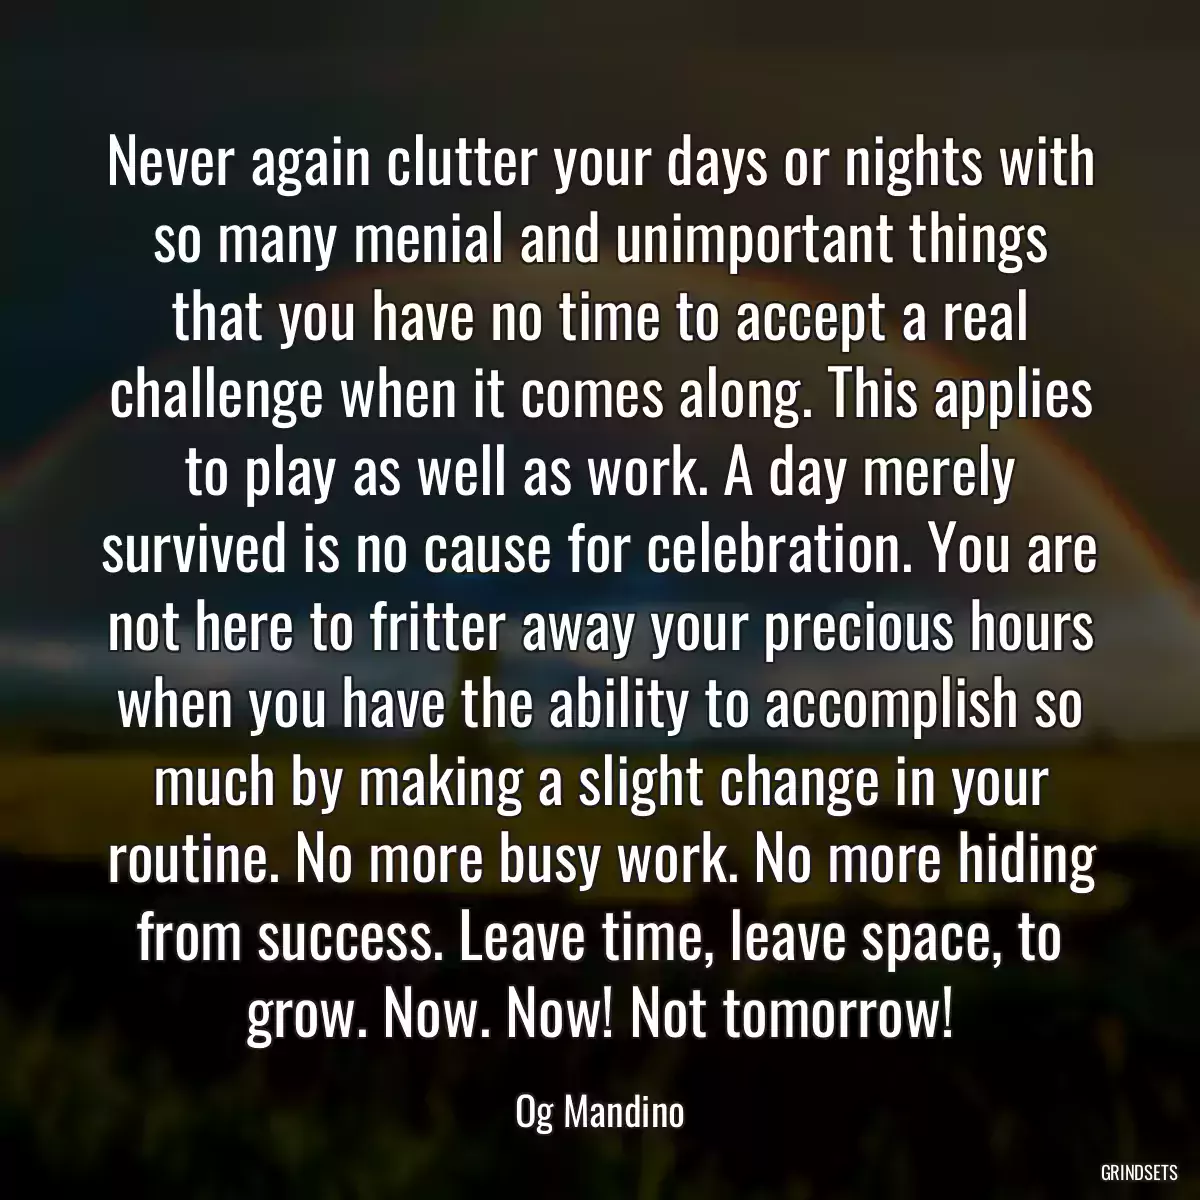 Never again clutter your days or nights with so many menial and unimportant things that you have no time to accept a real challenge when it comes along. This applies to play as well as work. A day merely survived is no cause for celebration. You are not here to fritter away your precious hours when you have the ability to accomplish so much by making a slight change in your routine. No more busy work. No more hiding from success. Leave time, leave space, to grow. Now. Now! Not tomorrow!